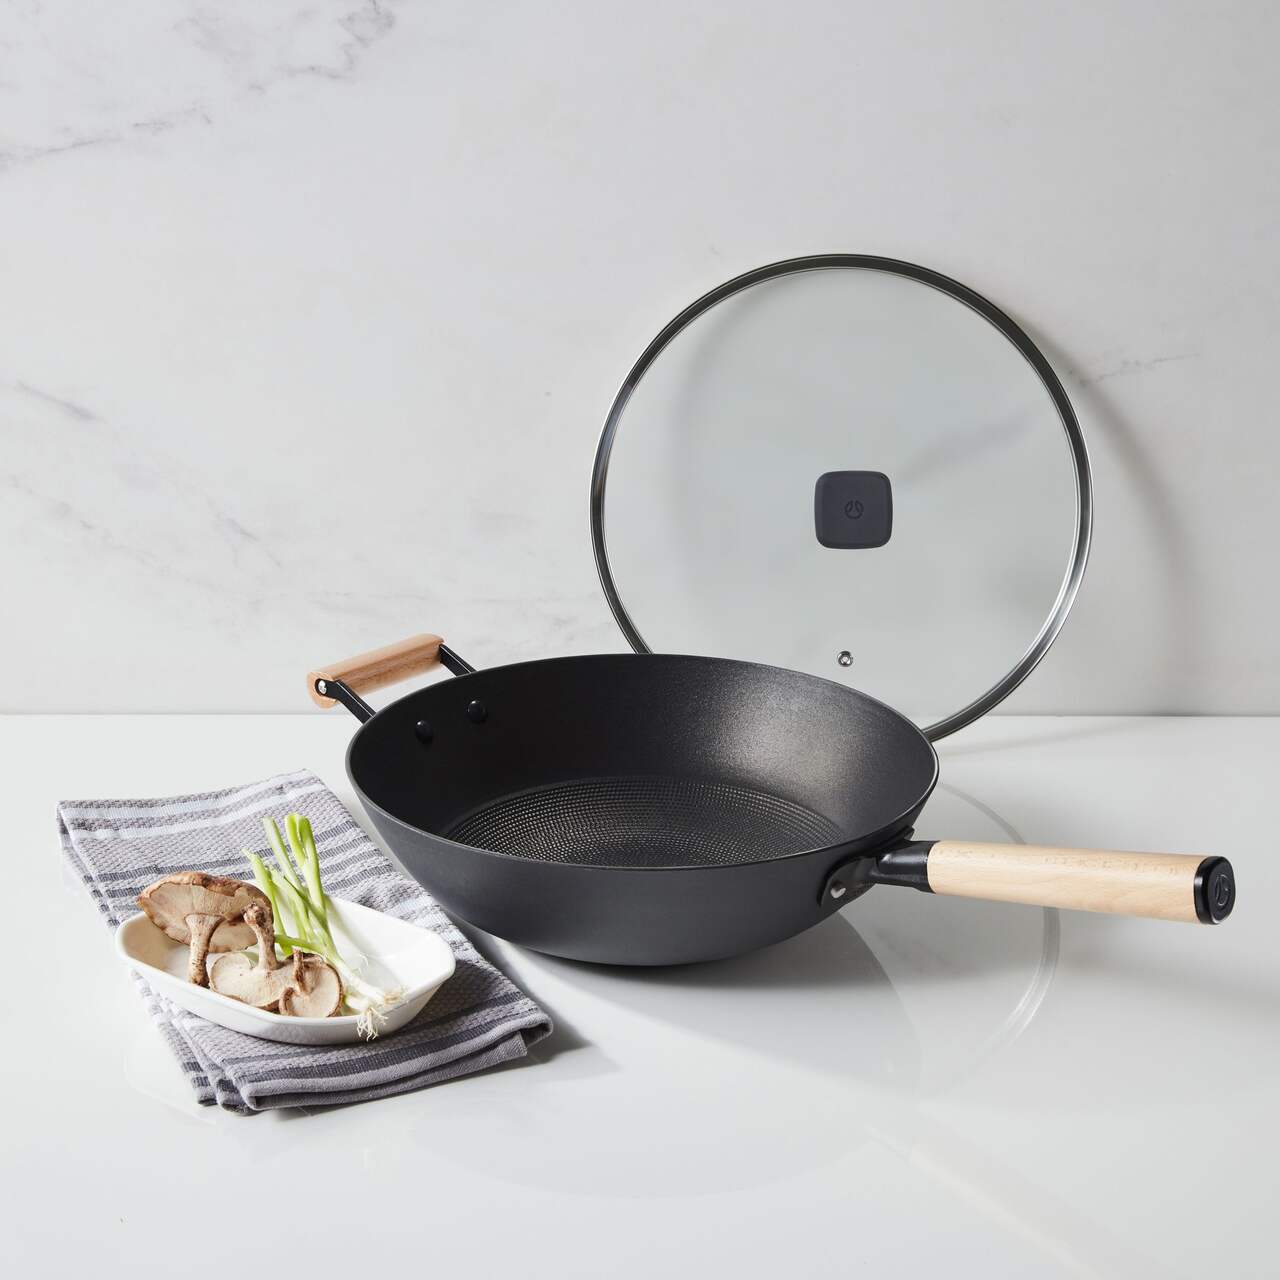 https://media-www.canadiantire.ca/product/living/kitchen/cookware/1425849/paderno-classic-non-stick-cast-iron-wok-39cc7b51-dd34-427a-a8b8-baabe5e951ec-jpgrendition.jpg?imdensity=1&imwidth=1244&impolicy=mZoom